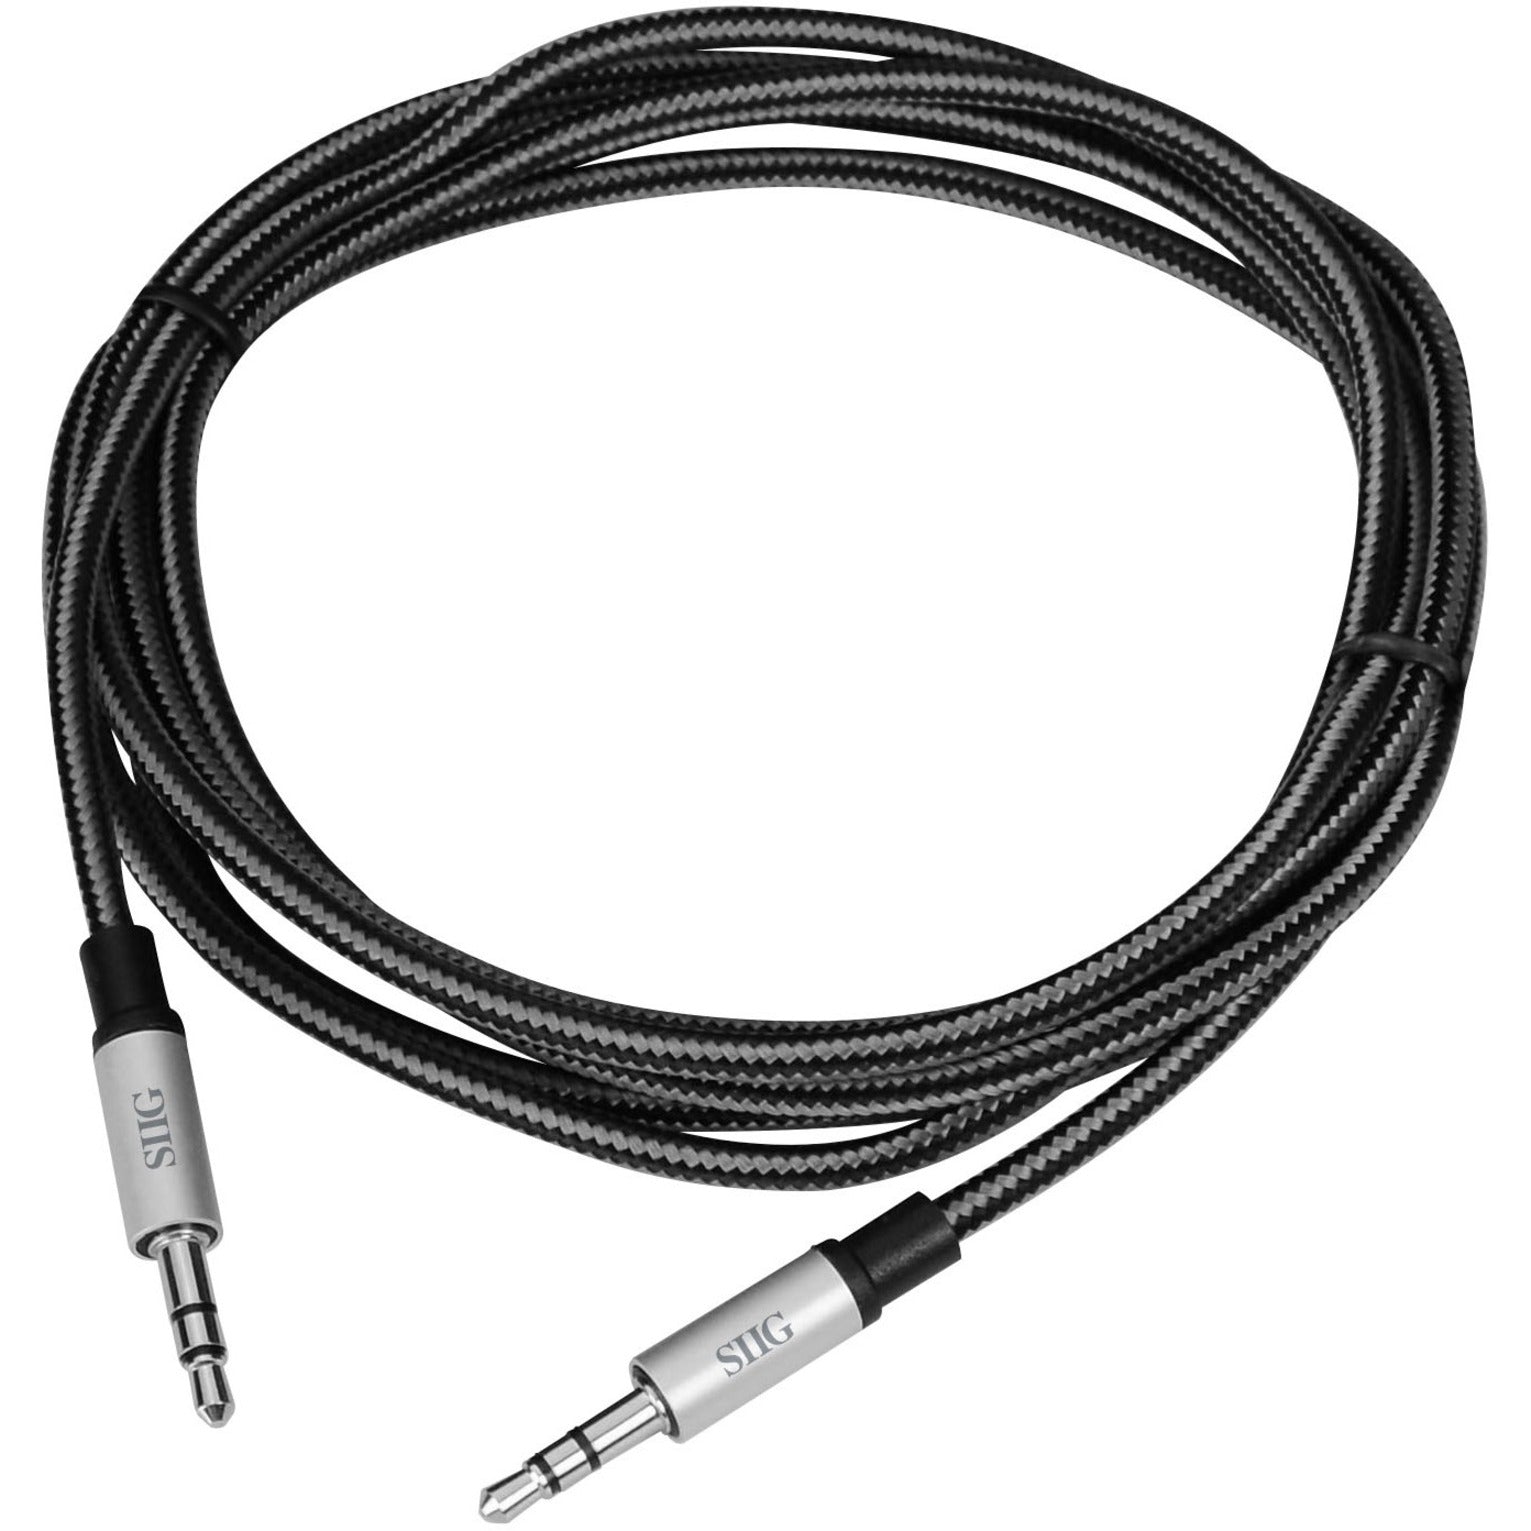 SIIG CB-AU0A12-S1 Woven Fabric Braided 3.5mm Stereo Aux Cable (M/M) - 2M, Tangle-Free, Loss-Less Audio, Durable